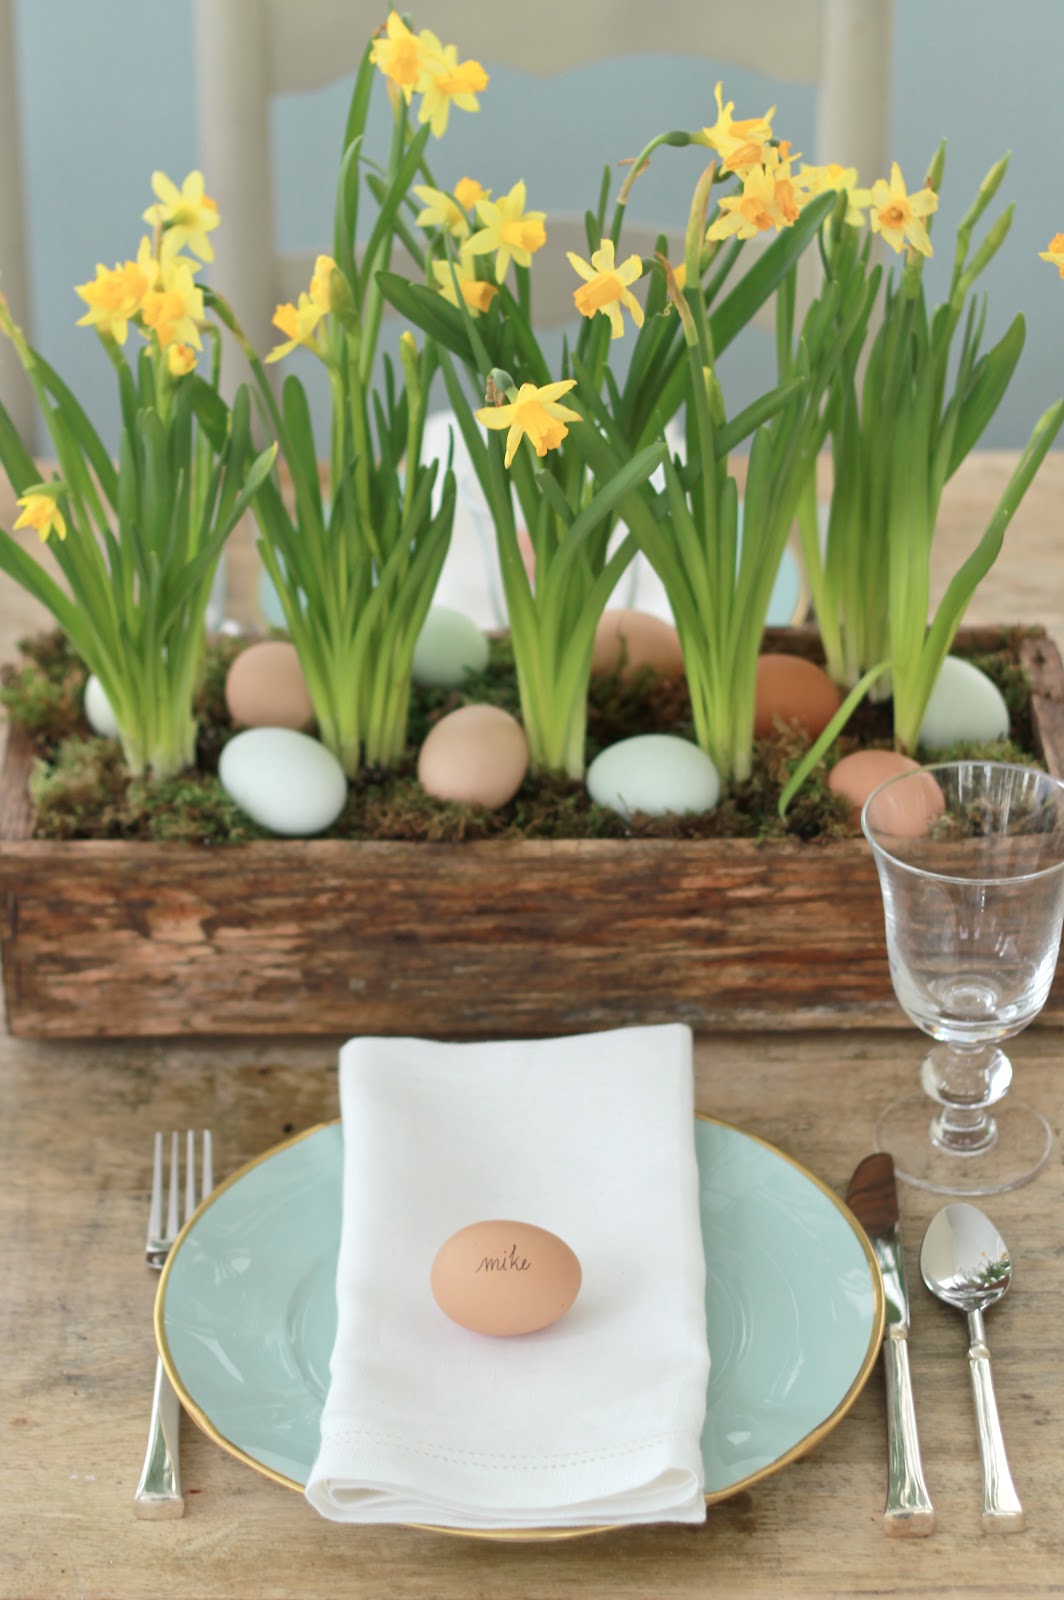 dining-room-ideas-amazing-easter-table-decorating-idea-with-green-plant-decorations-also-awesome-brunch-menu-also-baby-blue-plate-easter-table-decoration-ideas-easter-table-decorations-ideas-easter-